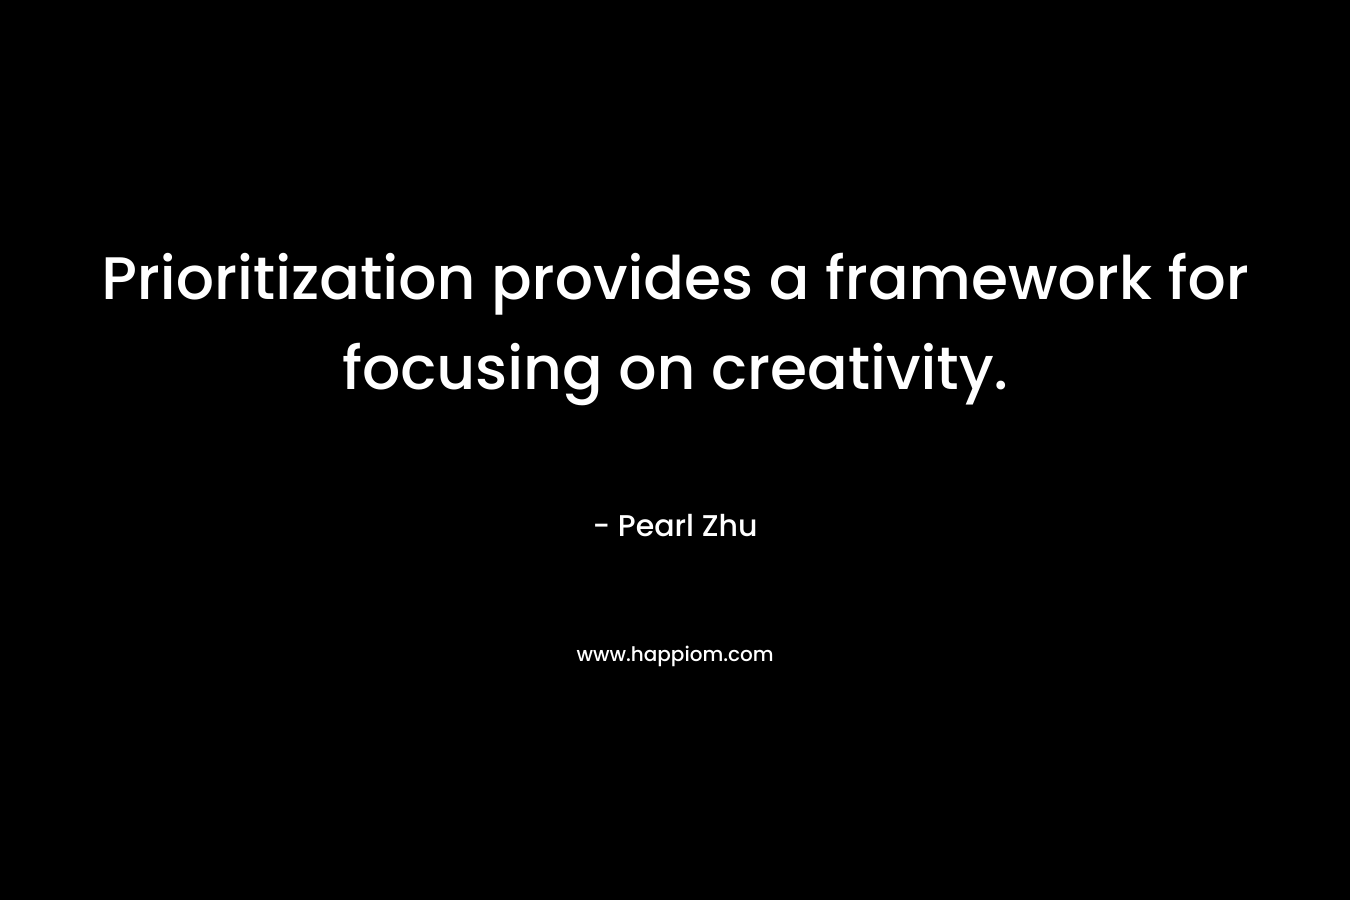 Prioritization provides a framework for focusing on creativity.